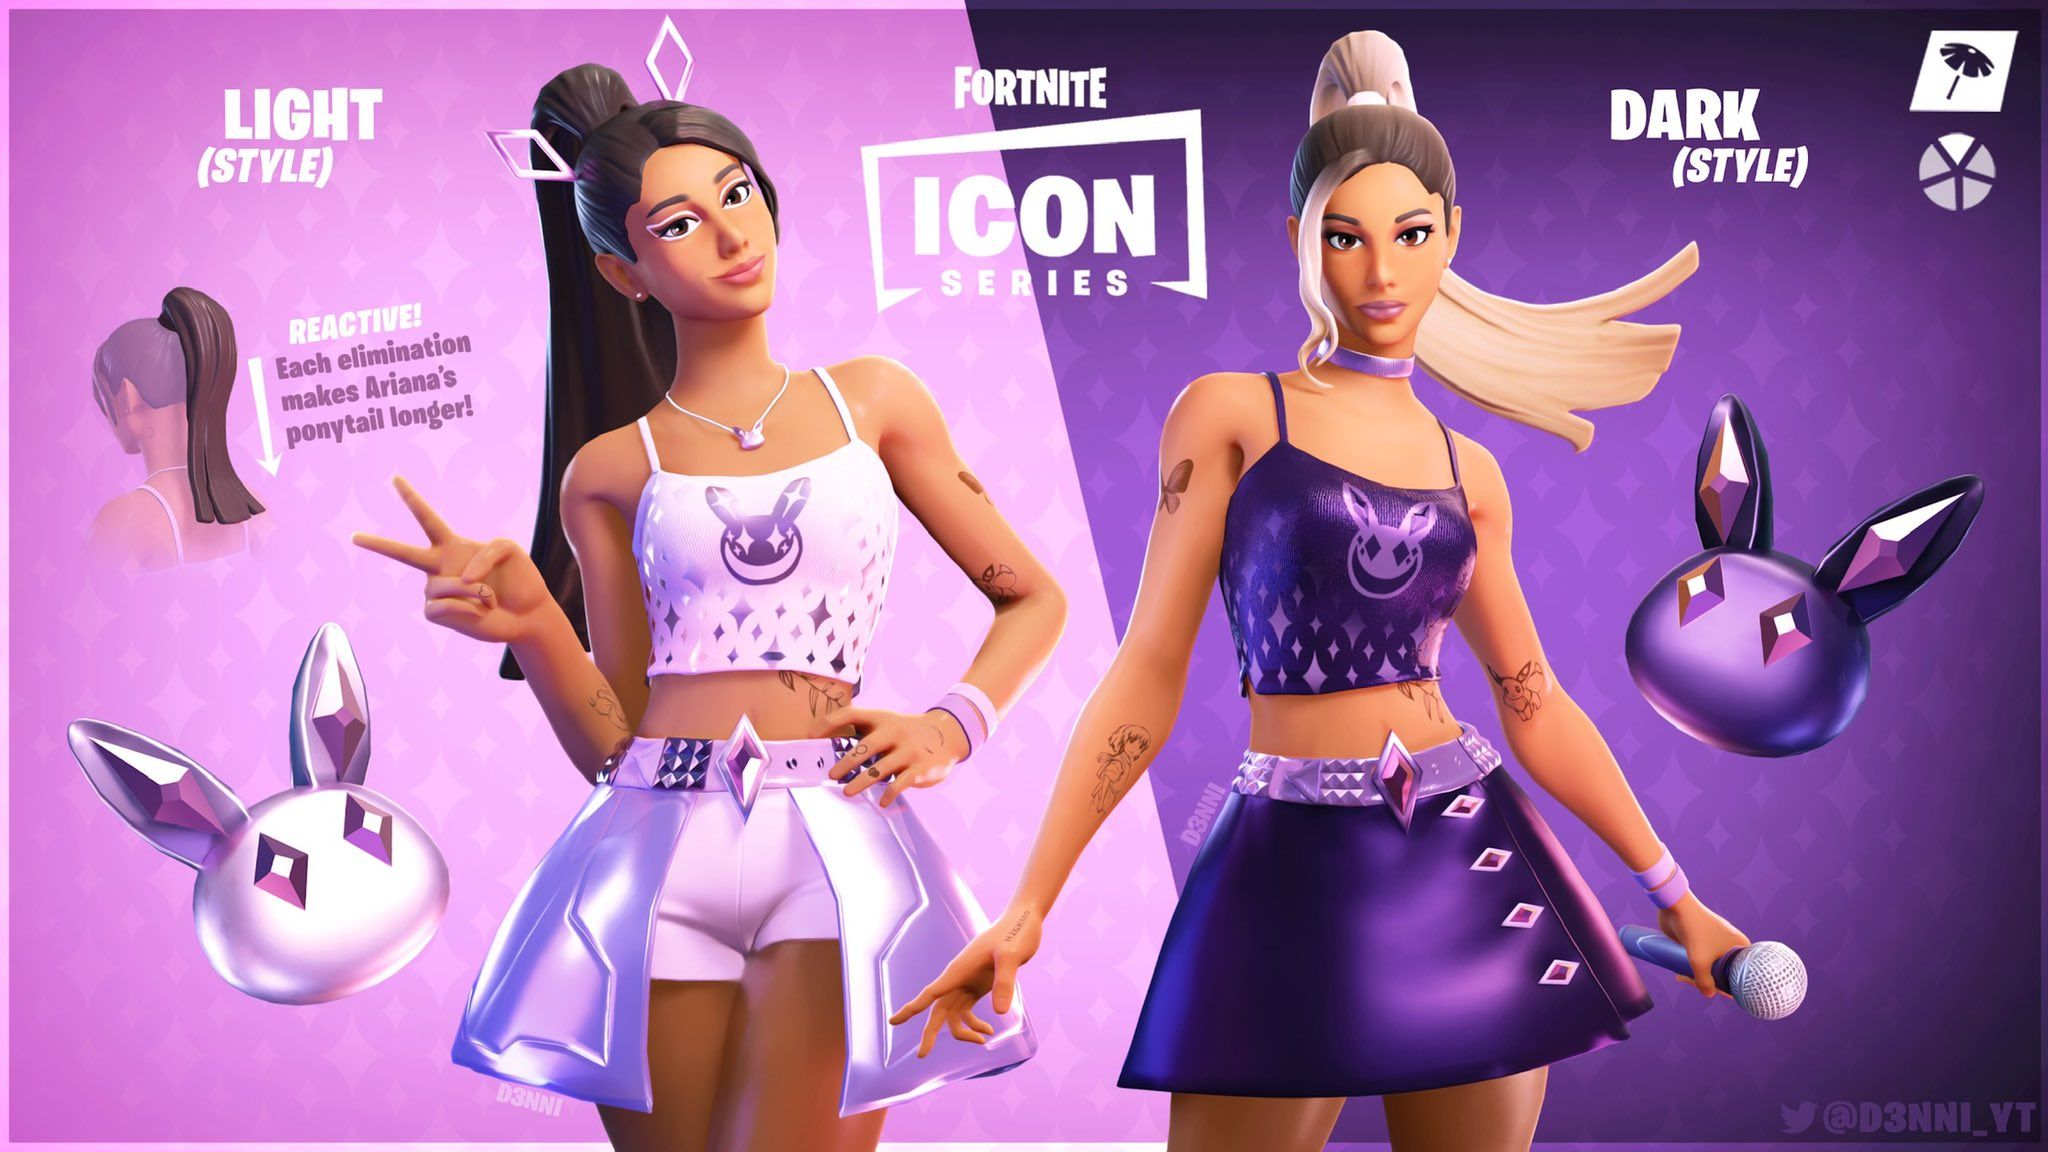 FortniteFanaticFan icon series skin which is arianagrande 2 styles, light (style) and (dark style). #fortnite #epicgames #icon #iconseries #arianagrande #skin styles #lightstyle #darkstyle #youtube #actress #nick #nickolodeon